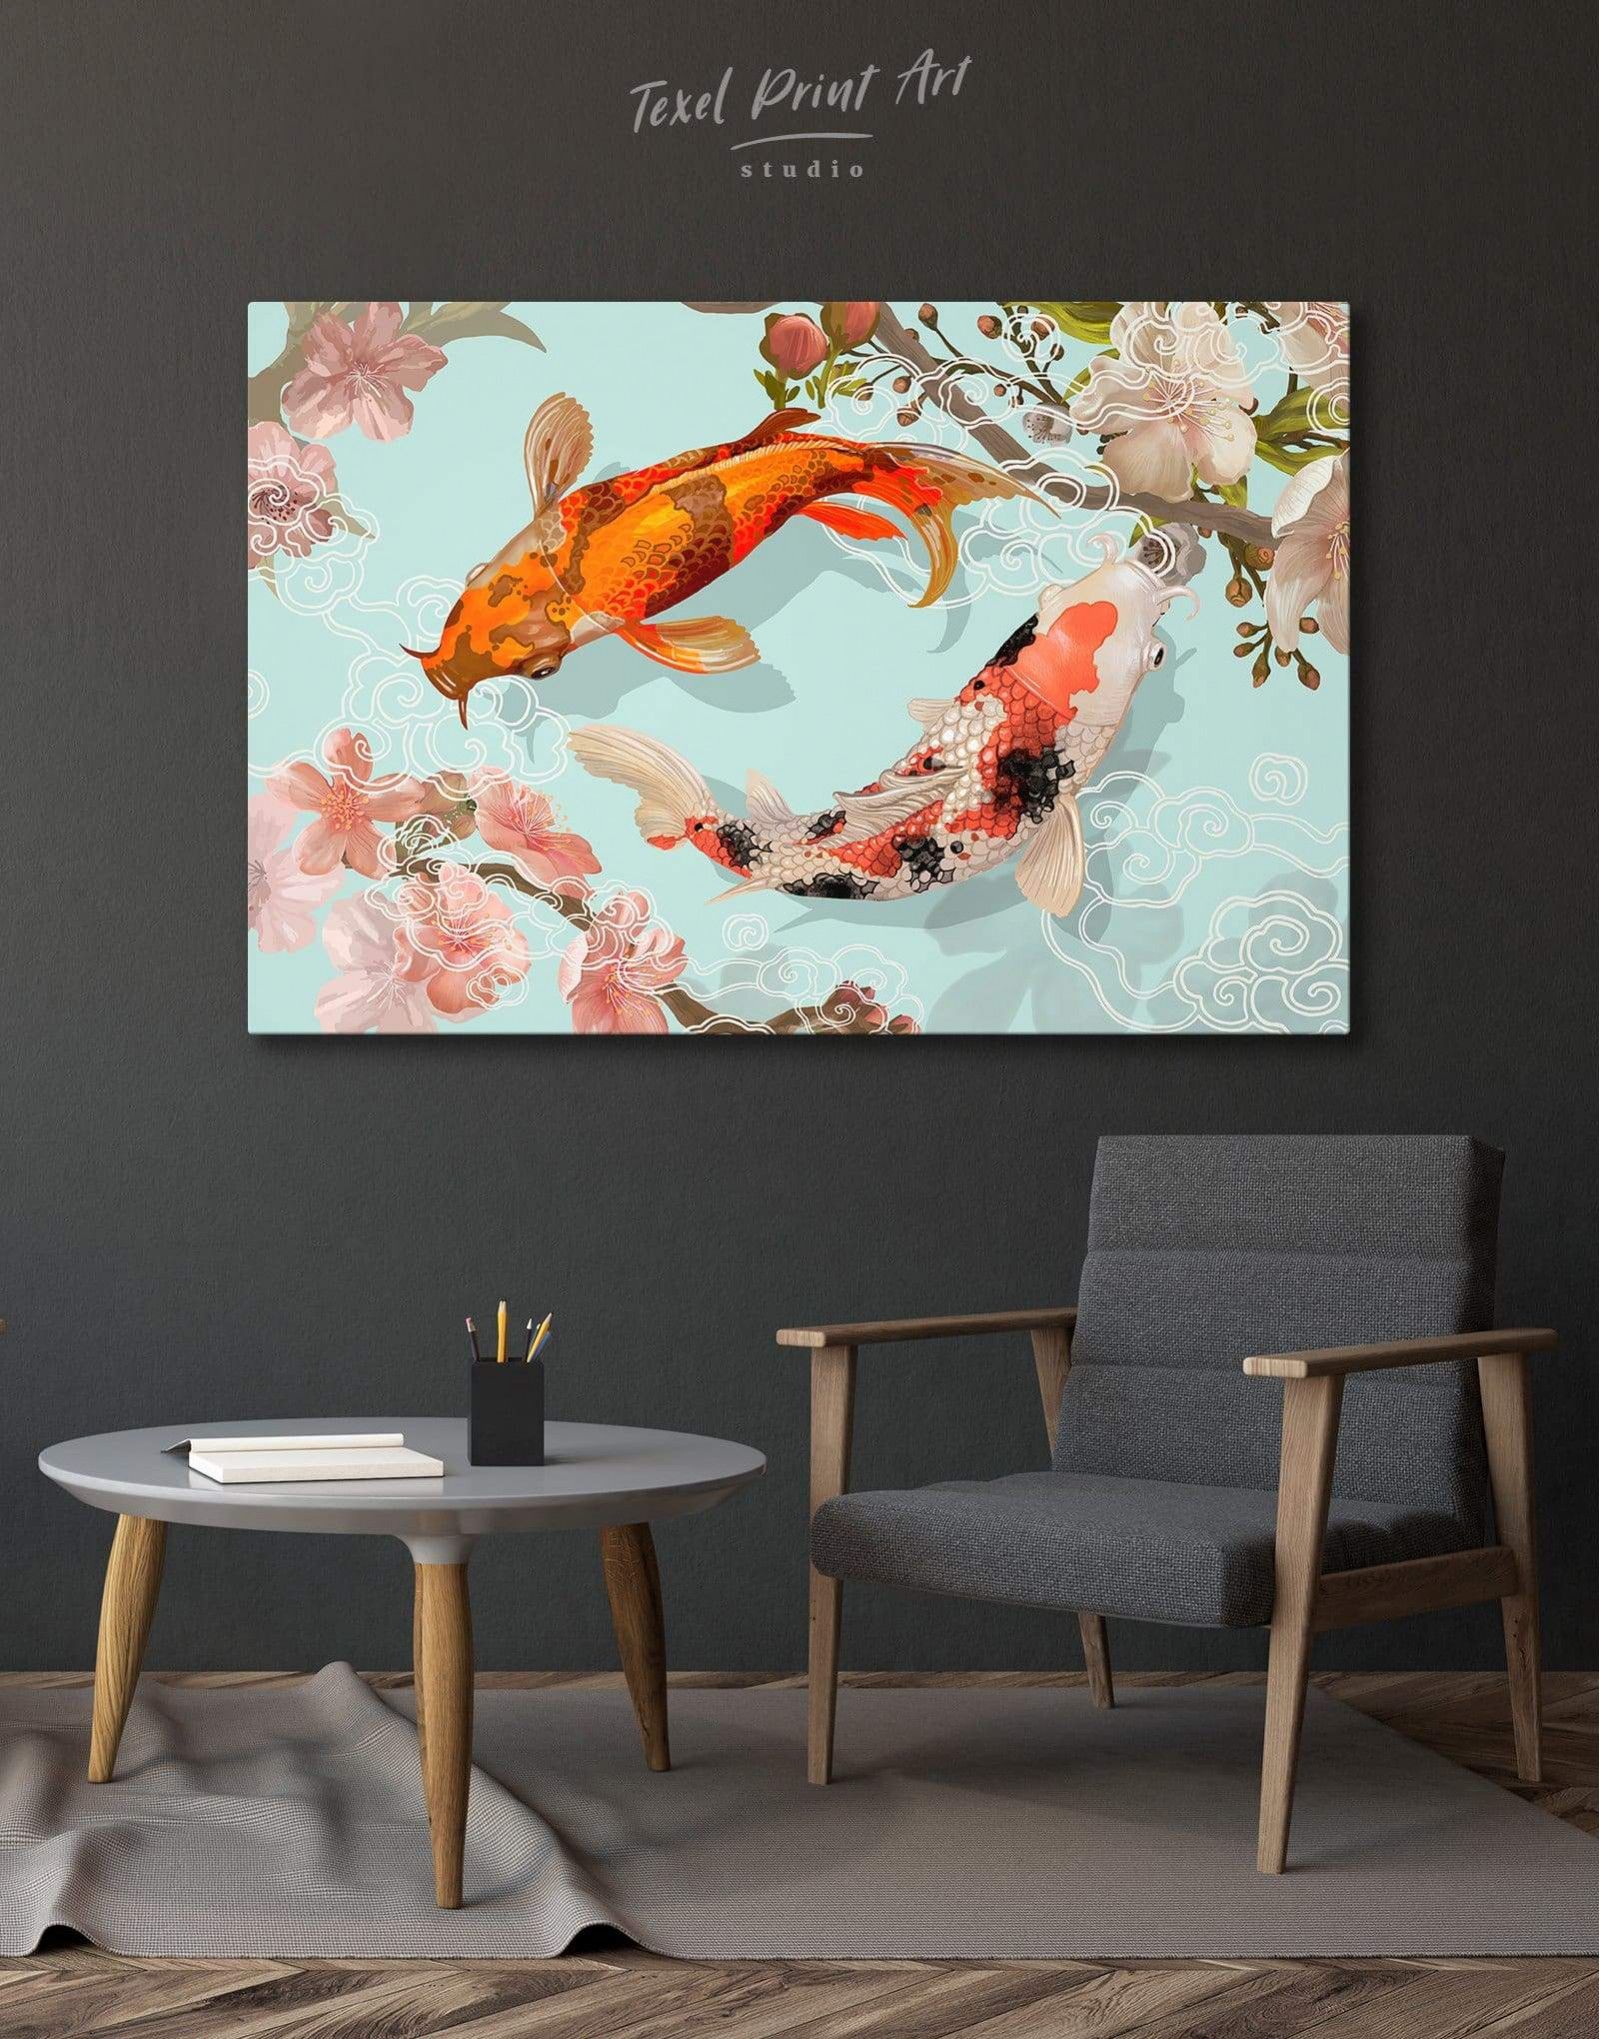 Two Koi Fish Swimming Together Canvas Wall Art | Texelprintart In Koi Wall Art (View 11 of 15)